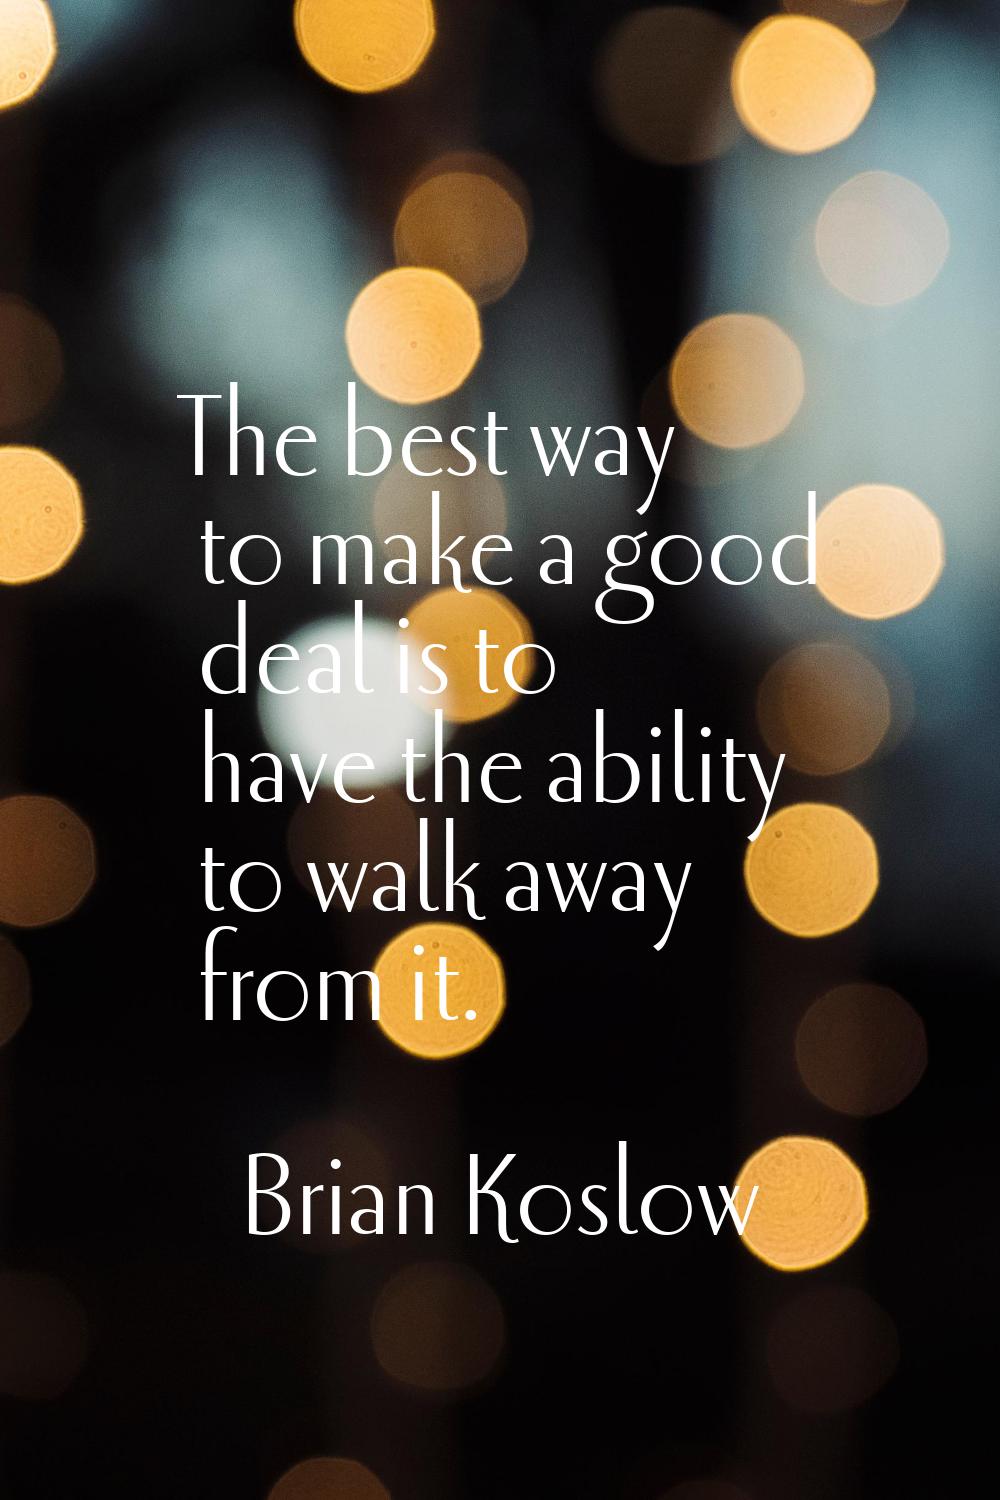 The best way to make a good deal is to have the ability to walk away from it.